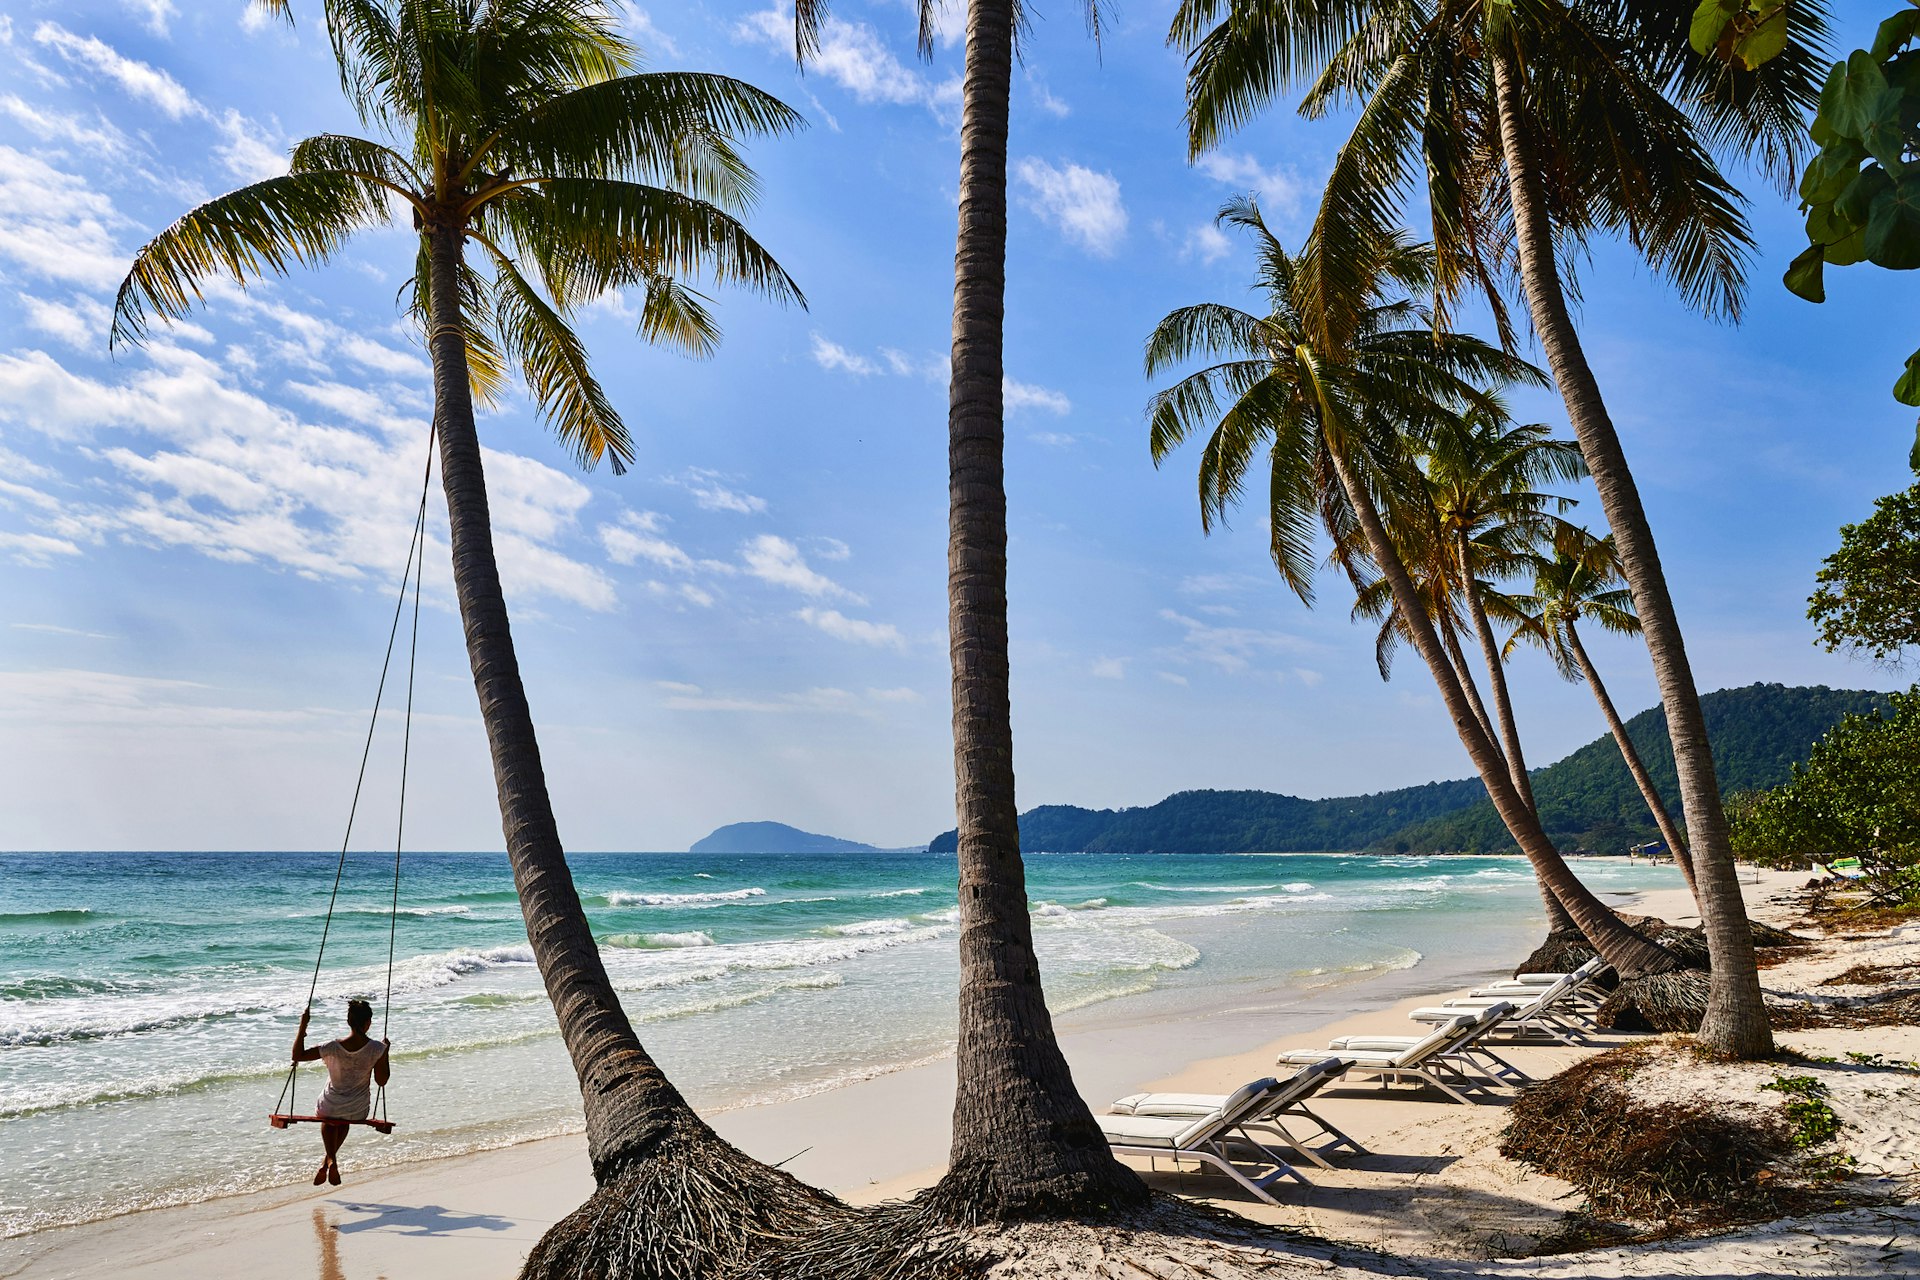 A woman sits on a swing connected to a palm tree on a beautiful beach